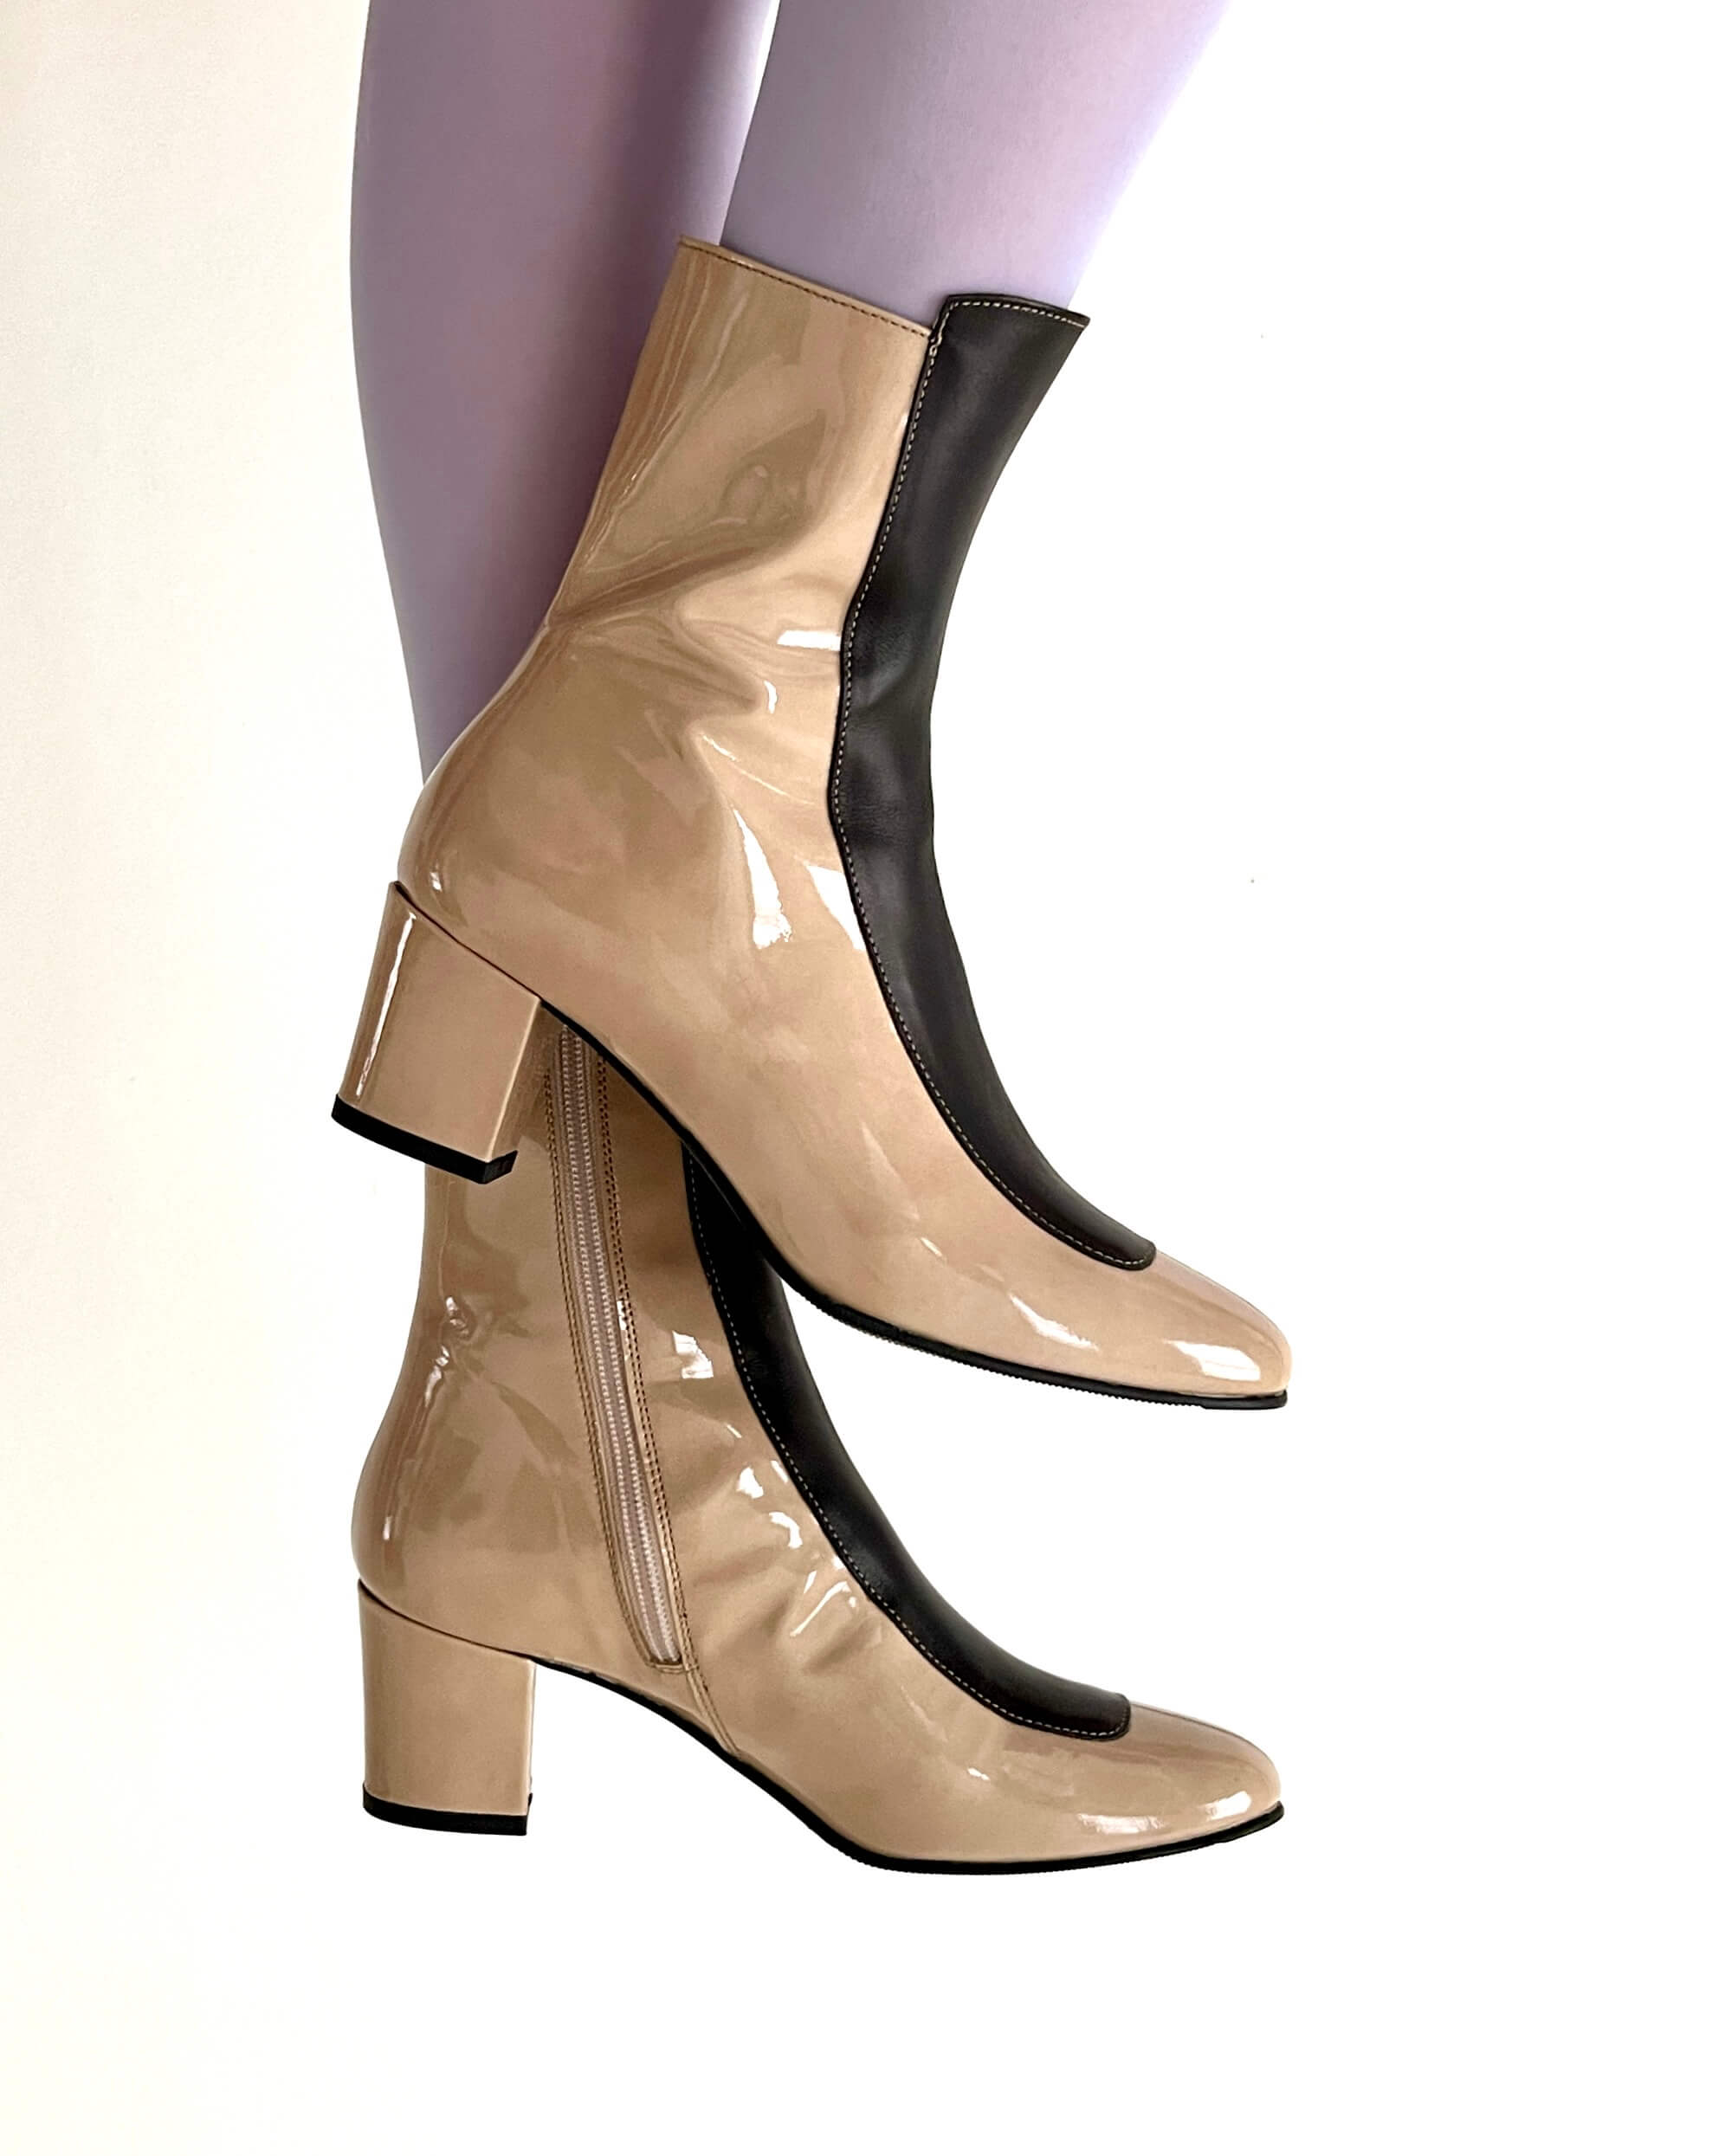 Ops&Ops No16 Sandstone Patent Leather block-heel boots worn with lilac tights